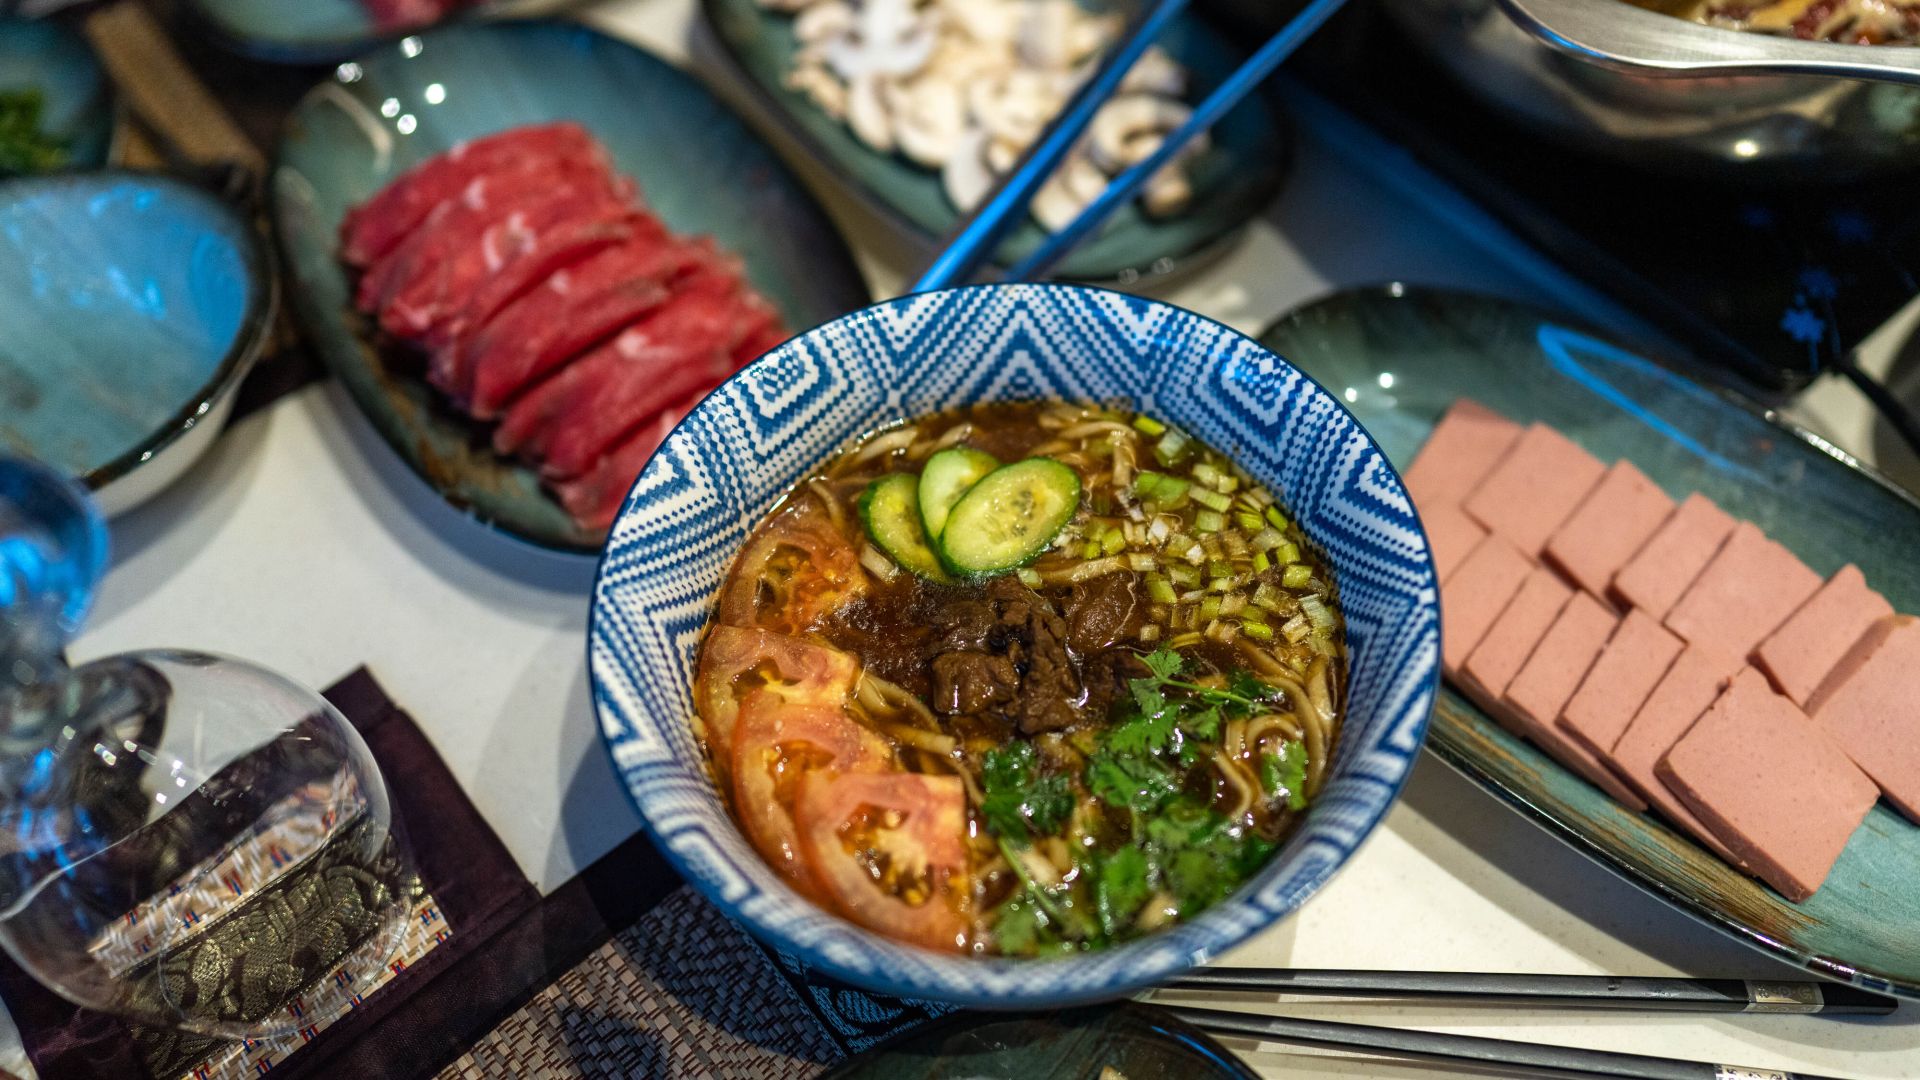 Overhead shot of a bowl of noodle soup topped with veggies and herbs and stir-fried beef